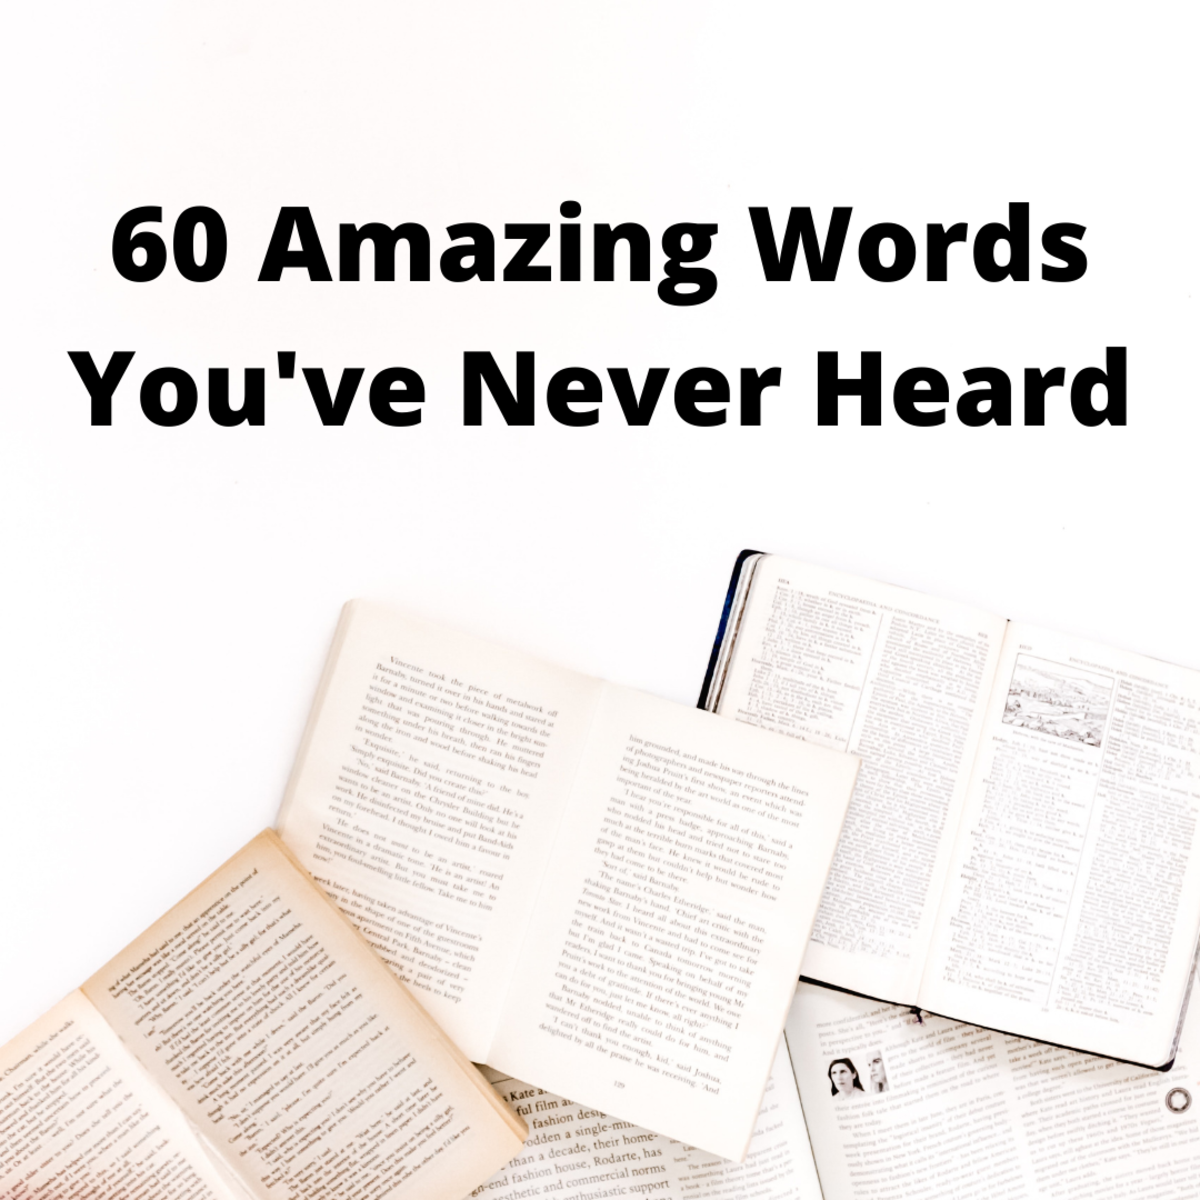 In this article, you'll learn 60+ words you've probably never heard. If you need to win a game of Scrabble or need help finding the perfect word for your short story, this list is for you! Each word is further explained by being placed in a sentence.